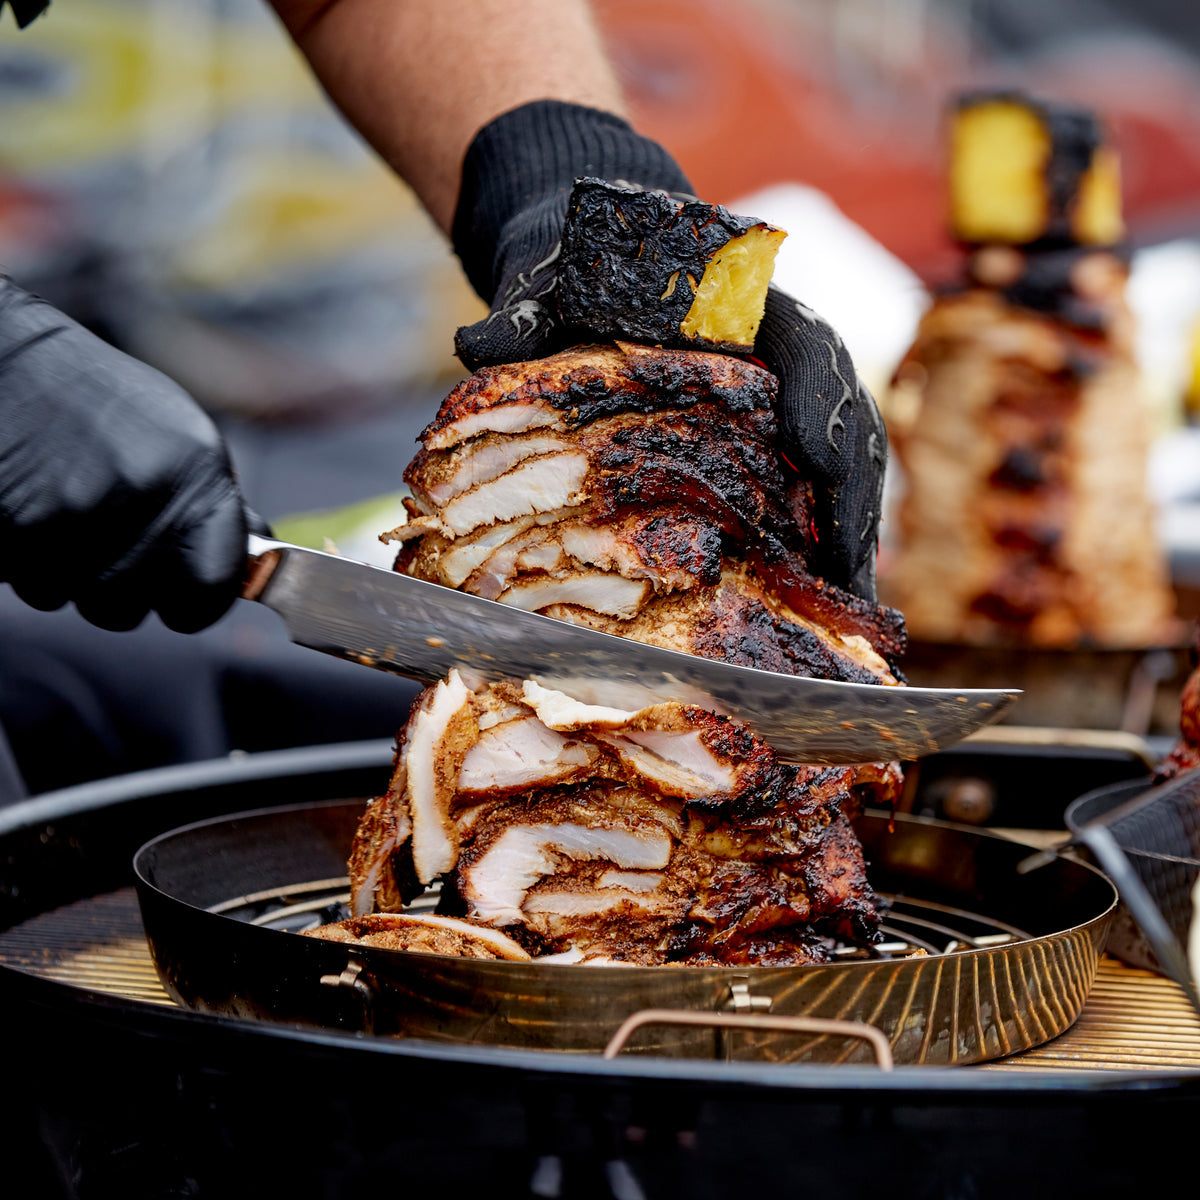 Grill Hacks: How To Make Tacos Al Pastor On The Grill - Food Republic